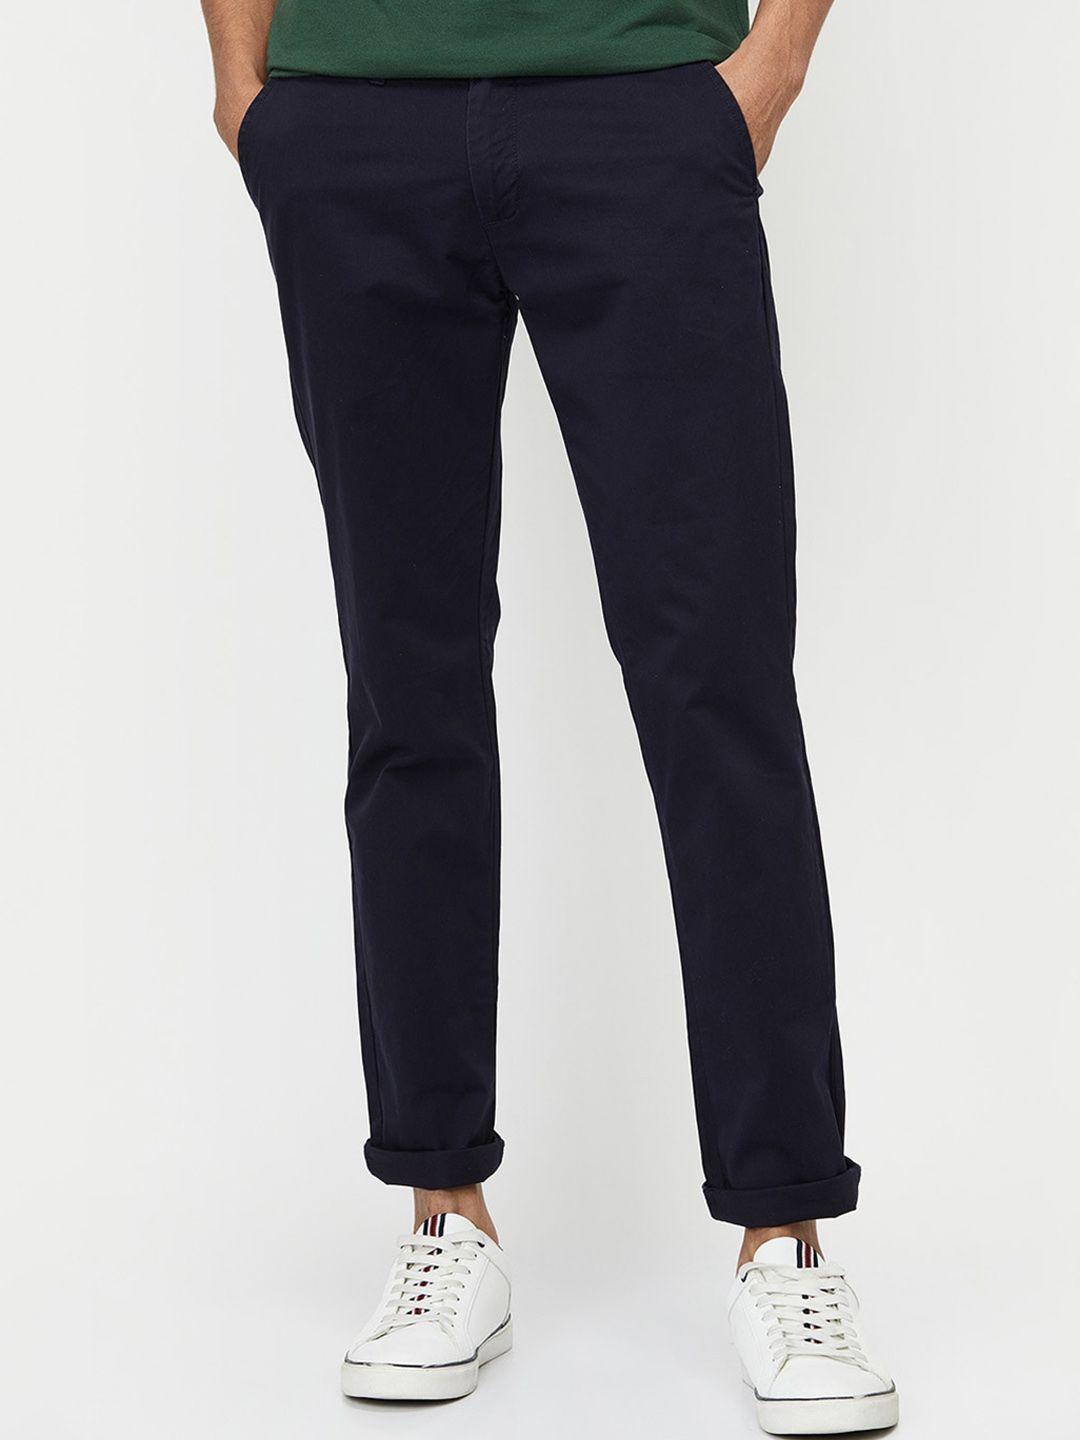 max-men-navy-blue-regular-fit-solid-chinos-trousers